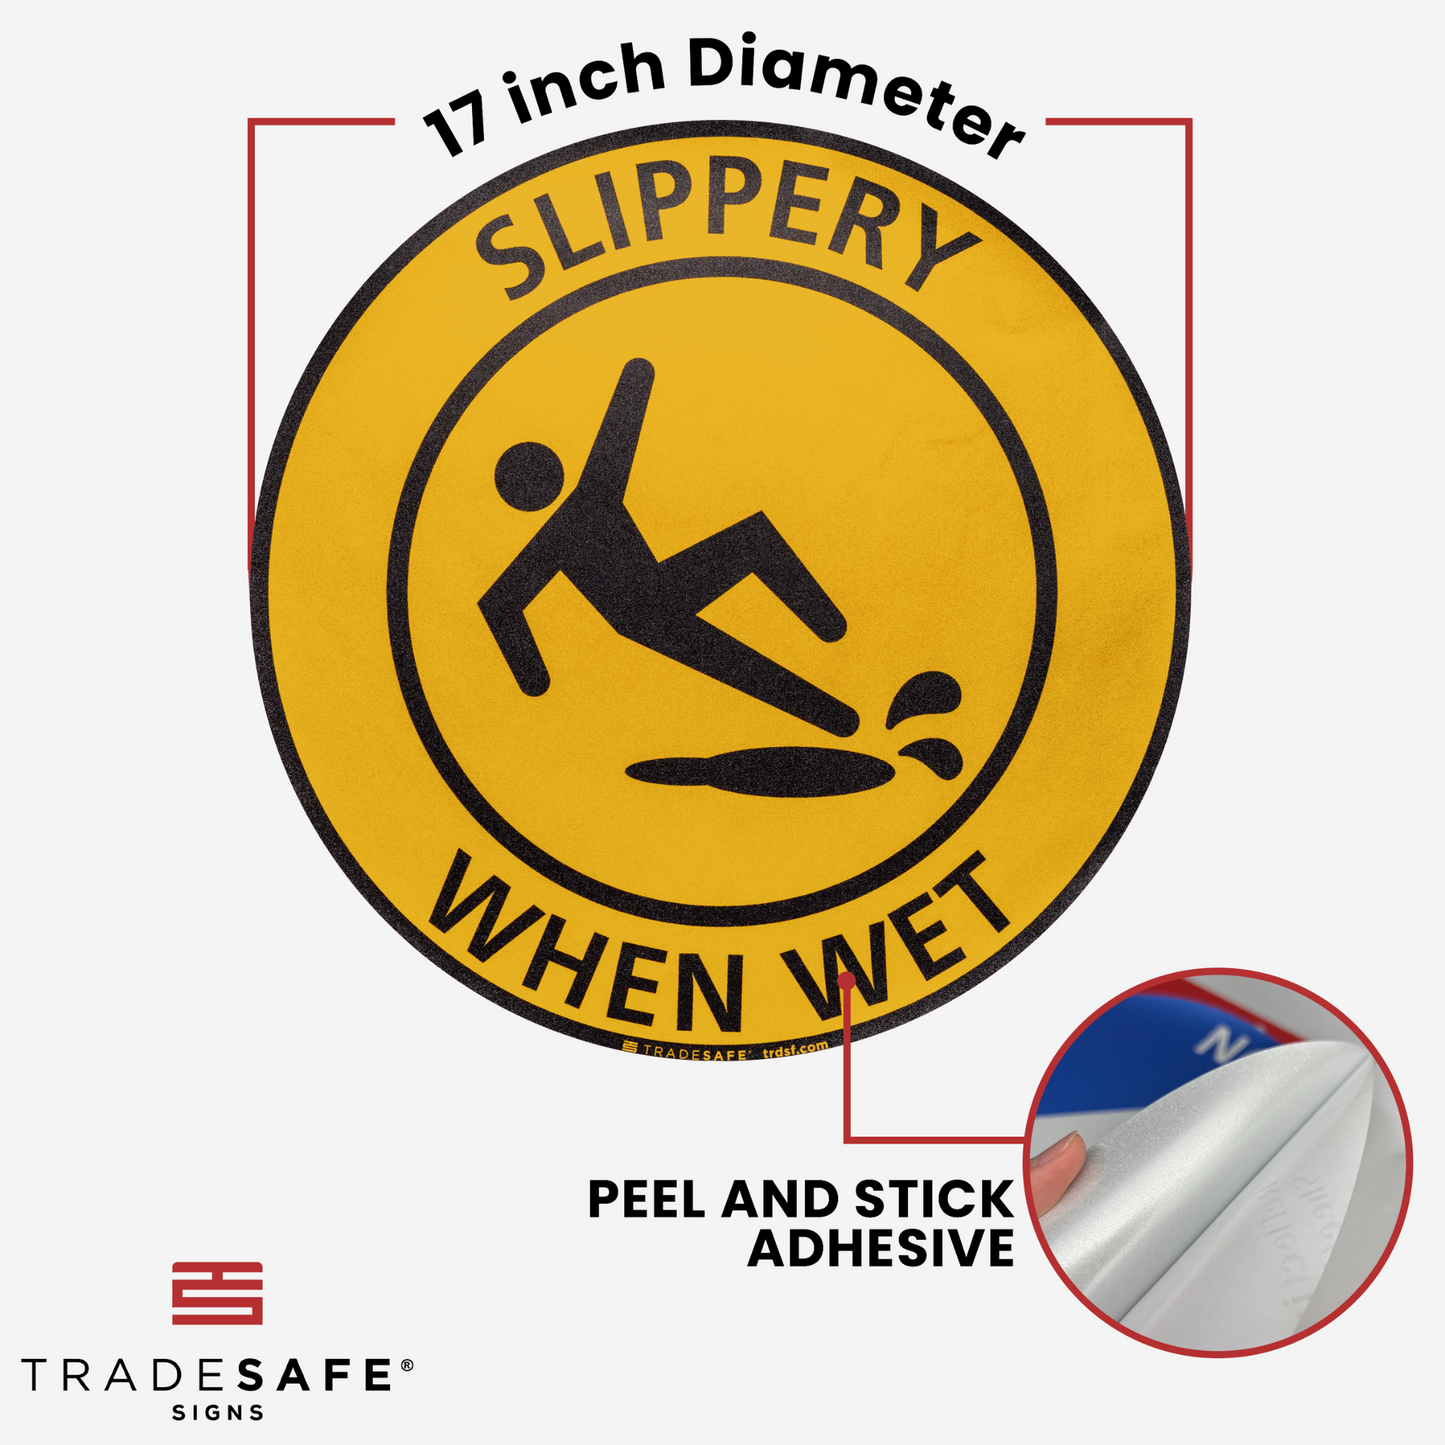 dimensions of "slippery when wet" sign